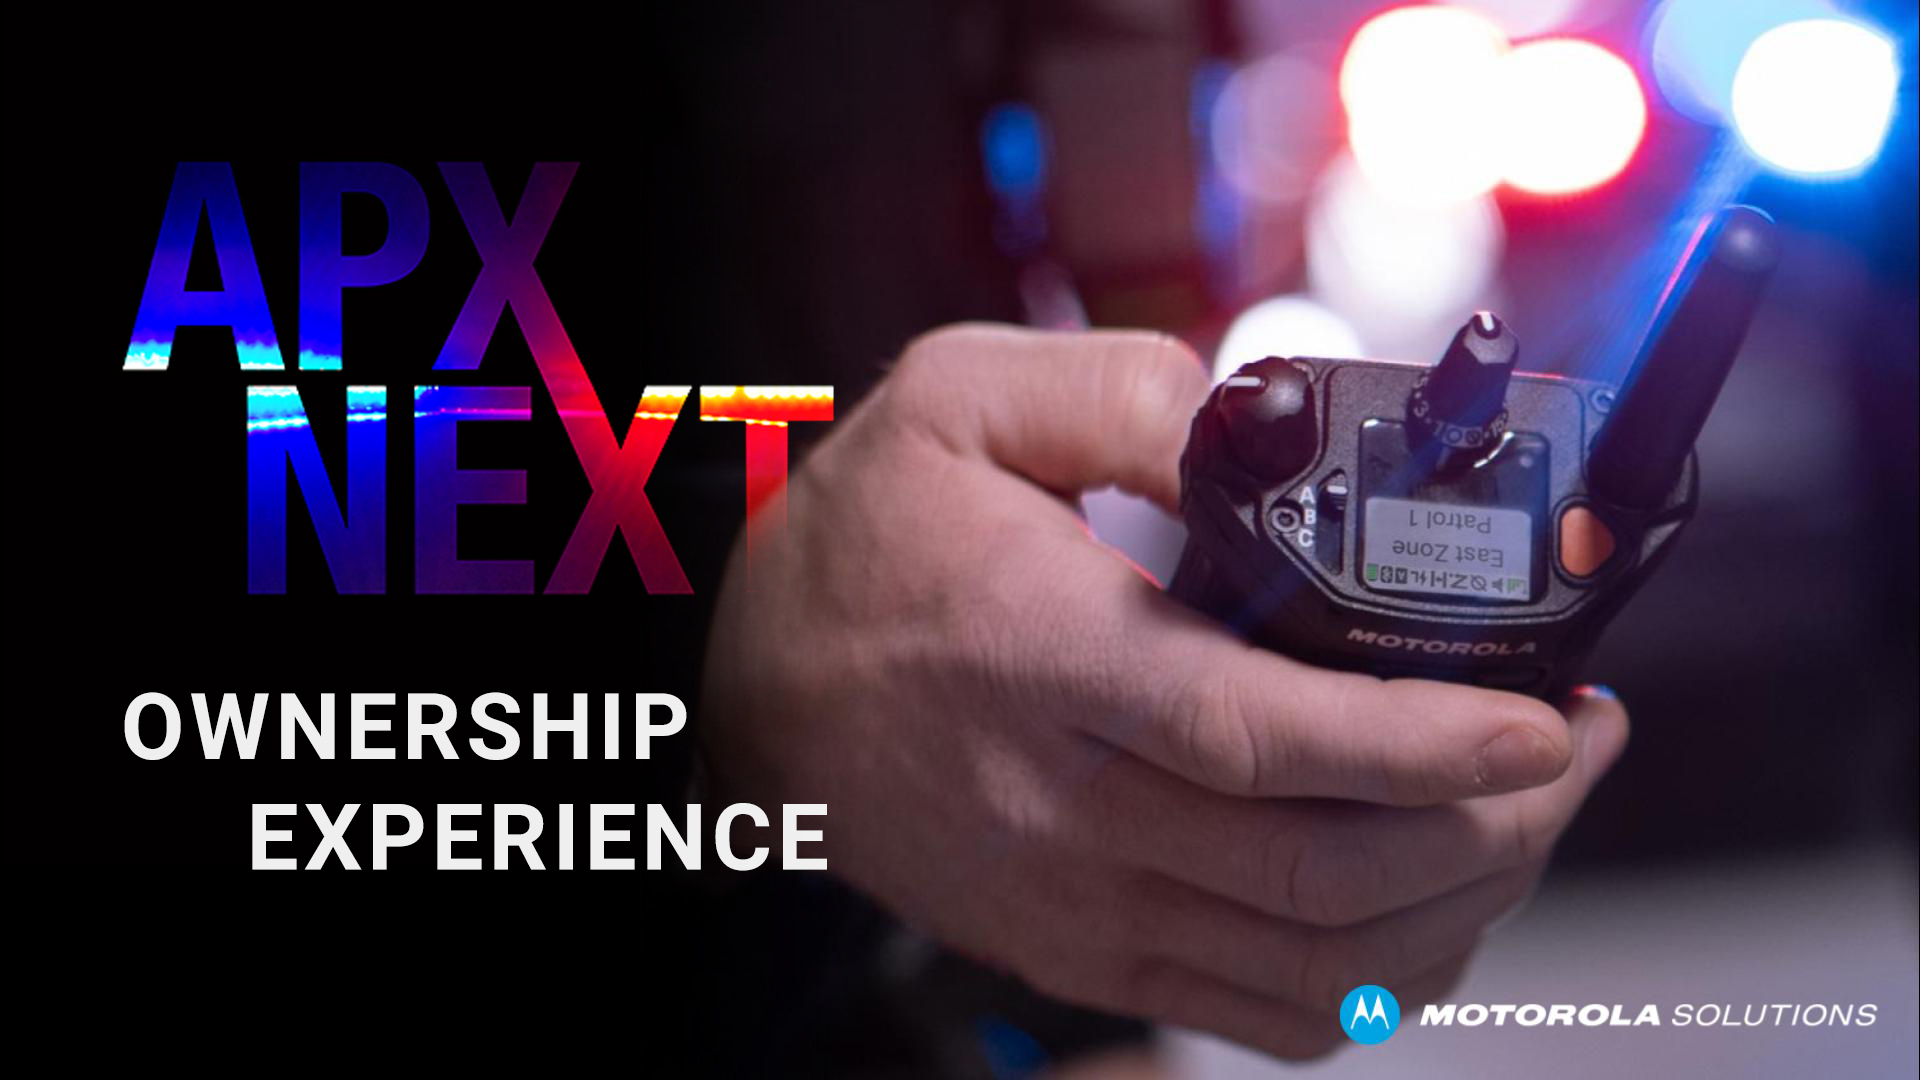 APX Next Ownership Experience Solution